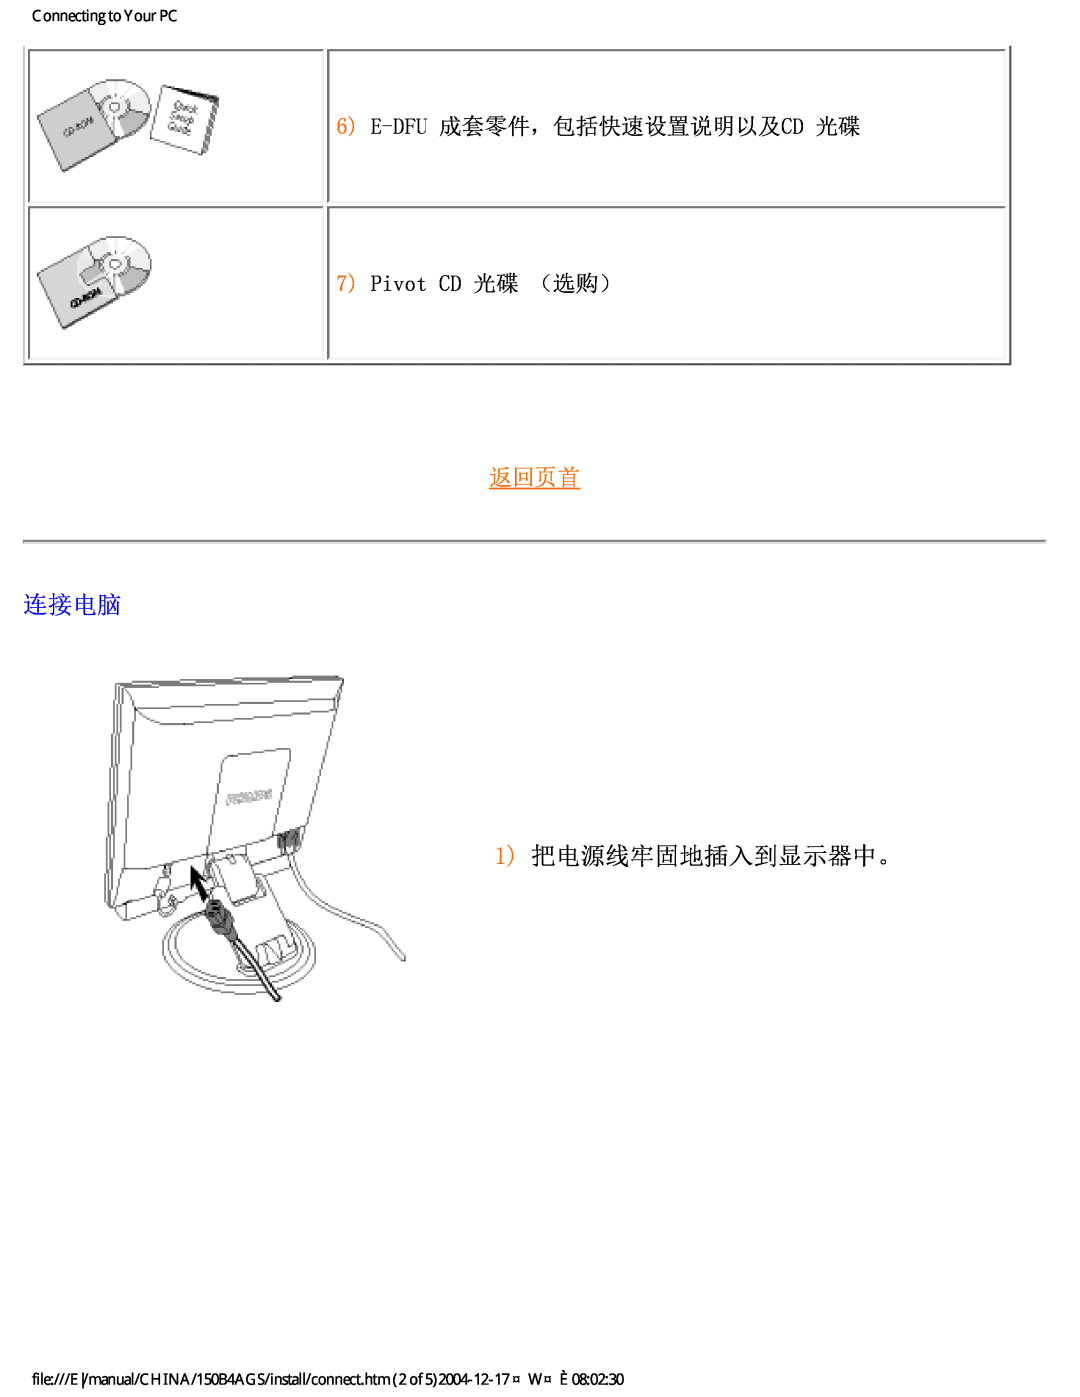 Philips 150B4AG, 150B4AS user manual 1 把电源线牢固地插入到显示器中。, 连接电脑, 返回页首, Connecting to Your PC 